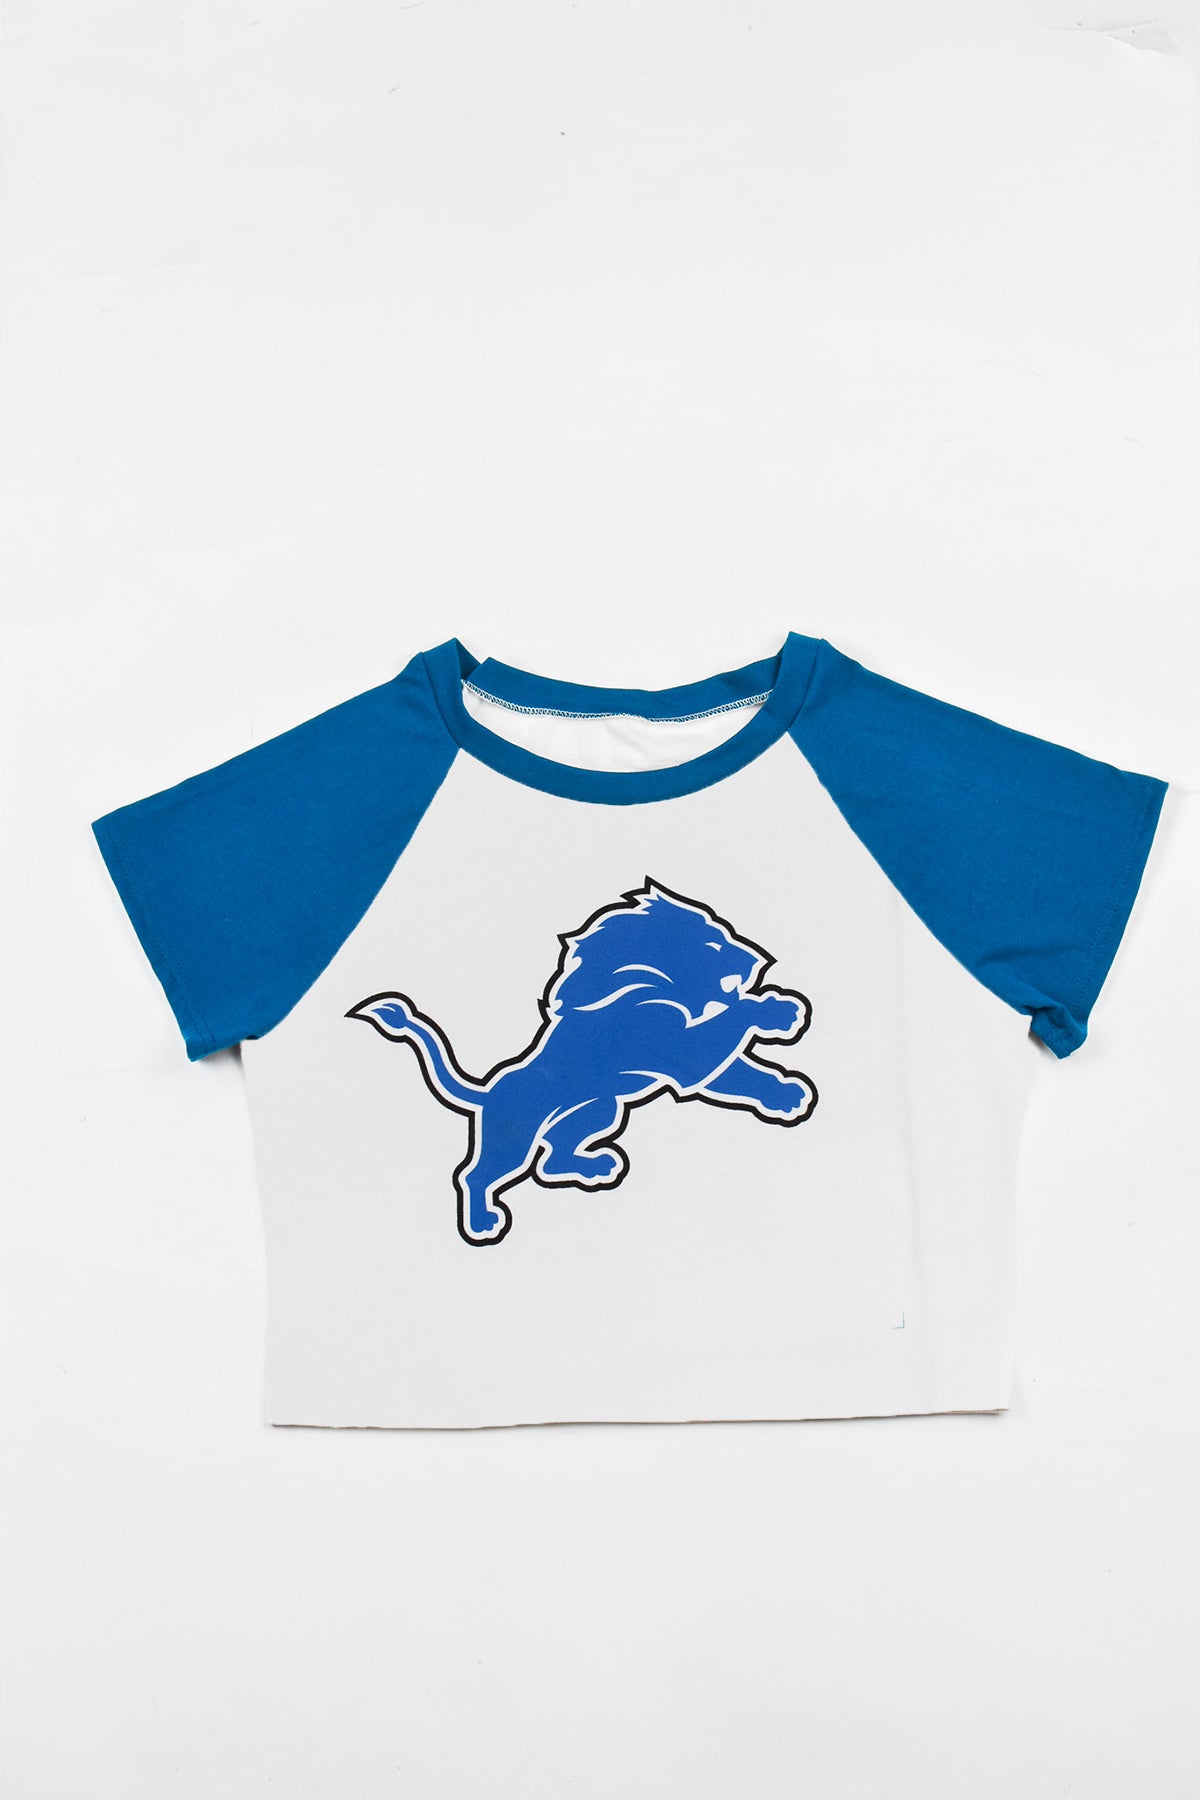 Upcycled Lions Baby Tee *MADE TO ORDER*